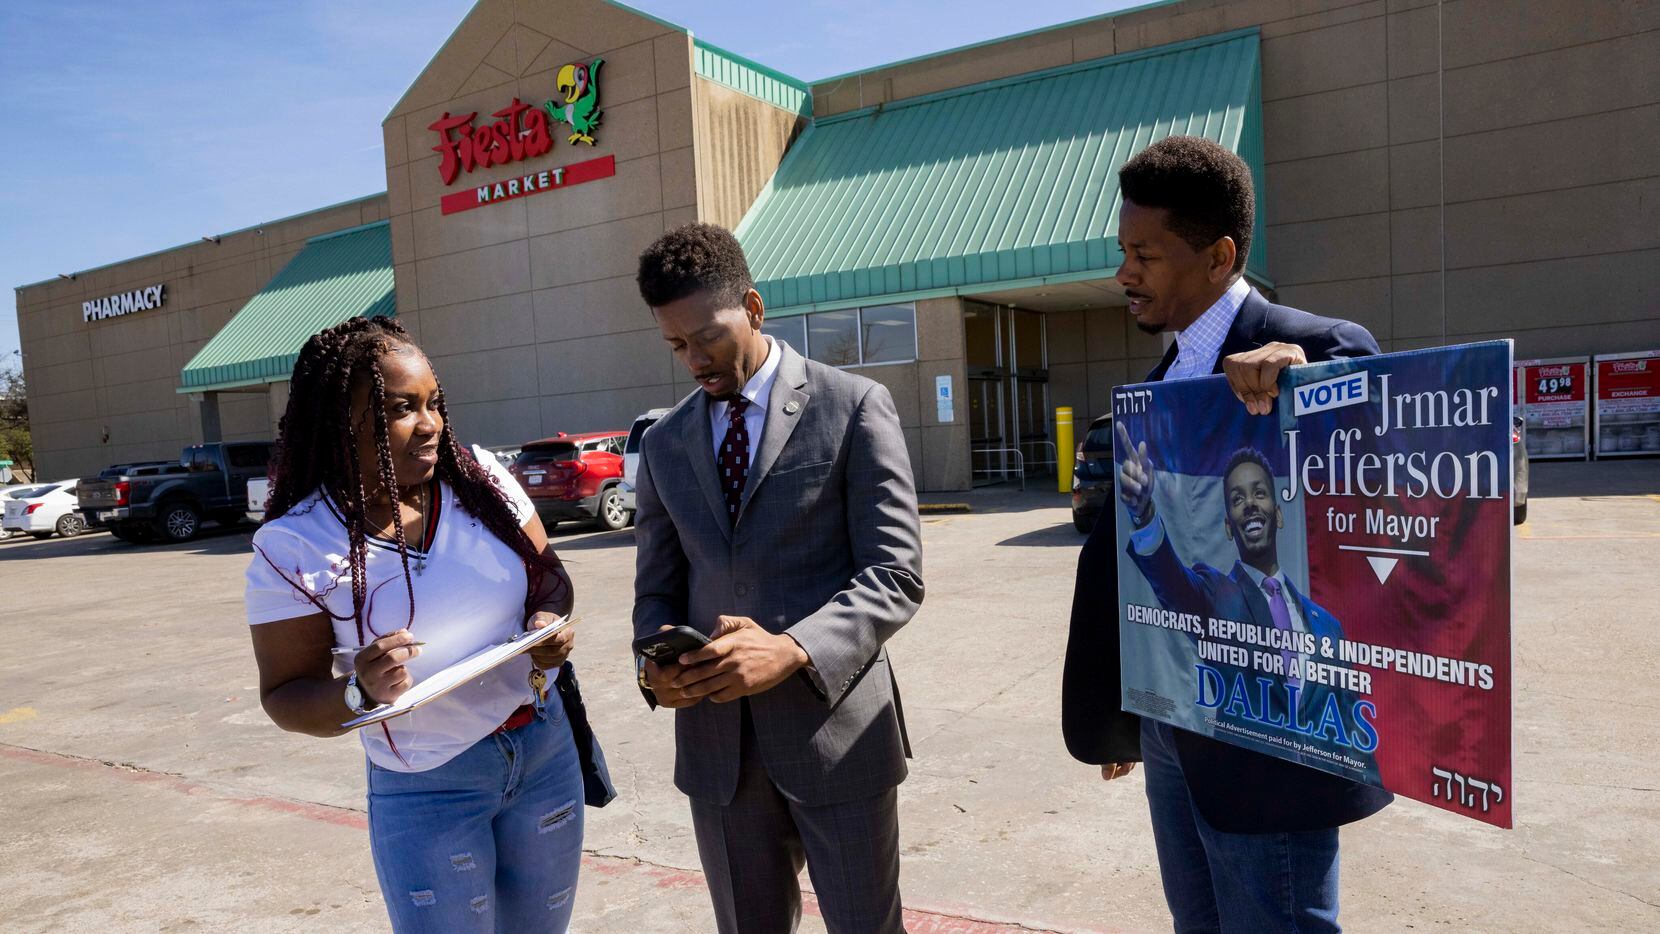 Jrmar Jefferson (center) and twin brother Lamar Jefferson (right) talk with a voter outside...